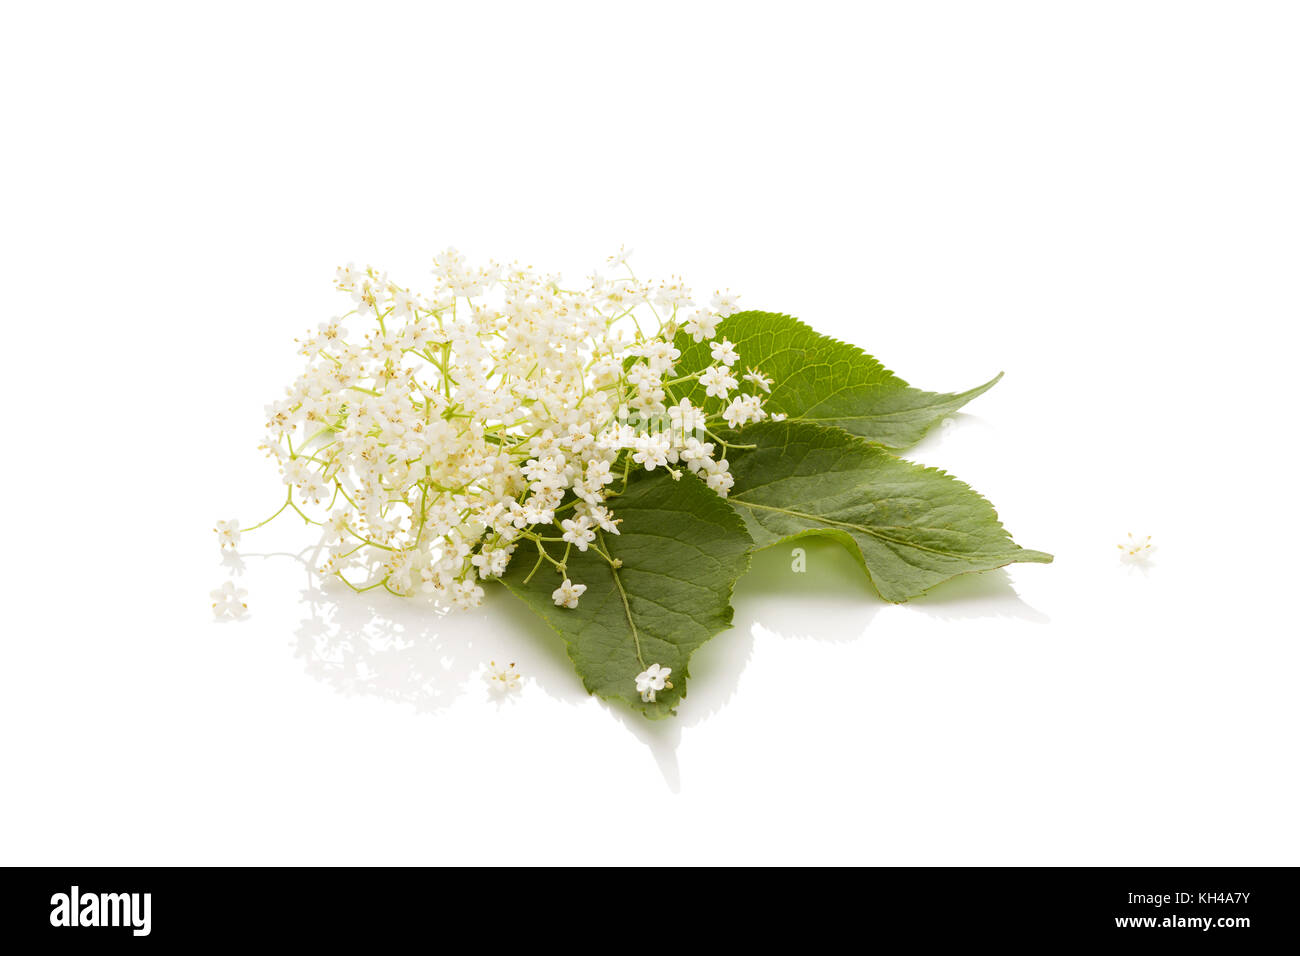 Elderberry flower (Sambucus nigra) isolated on a white background. Medicinal plant. Natural remedy. Stock Photo